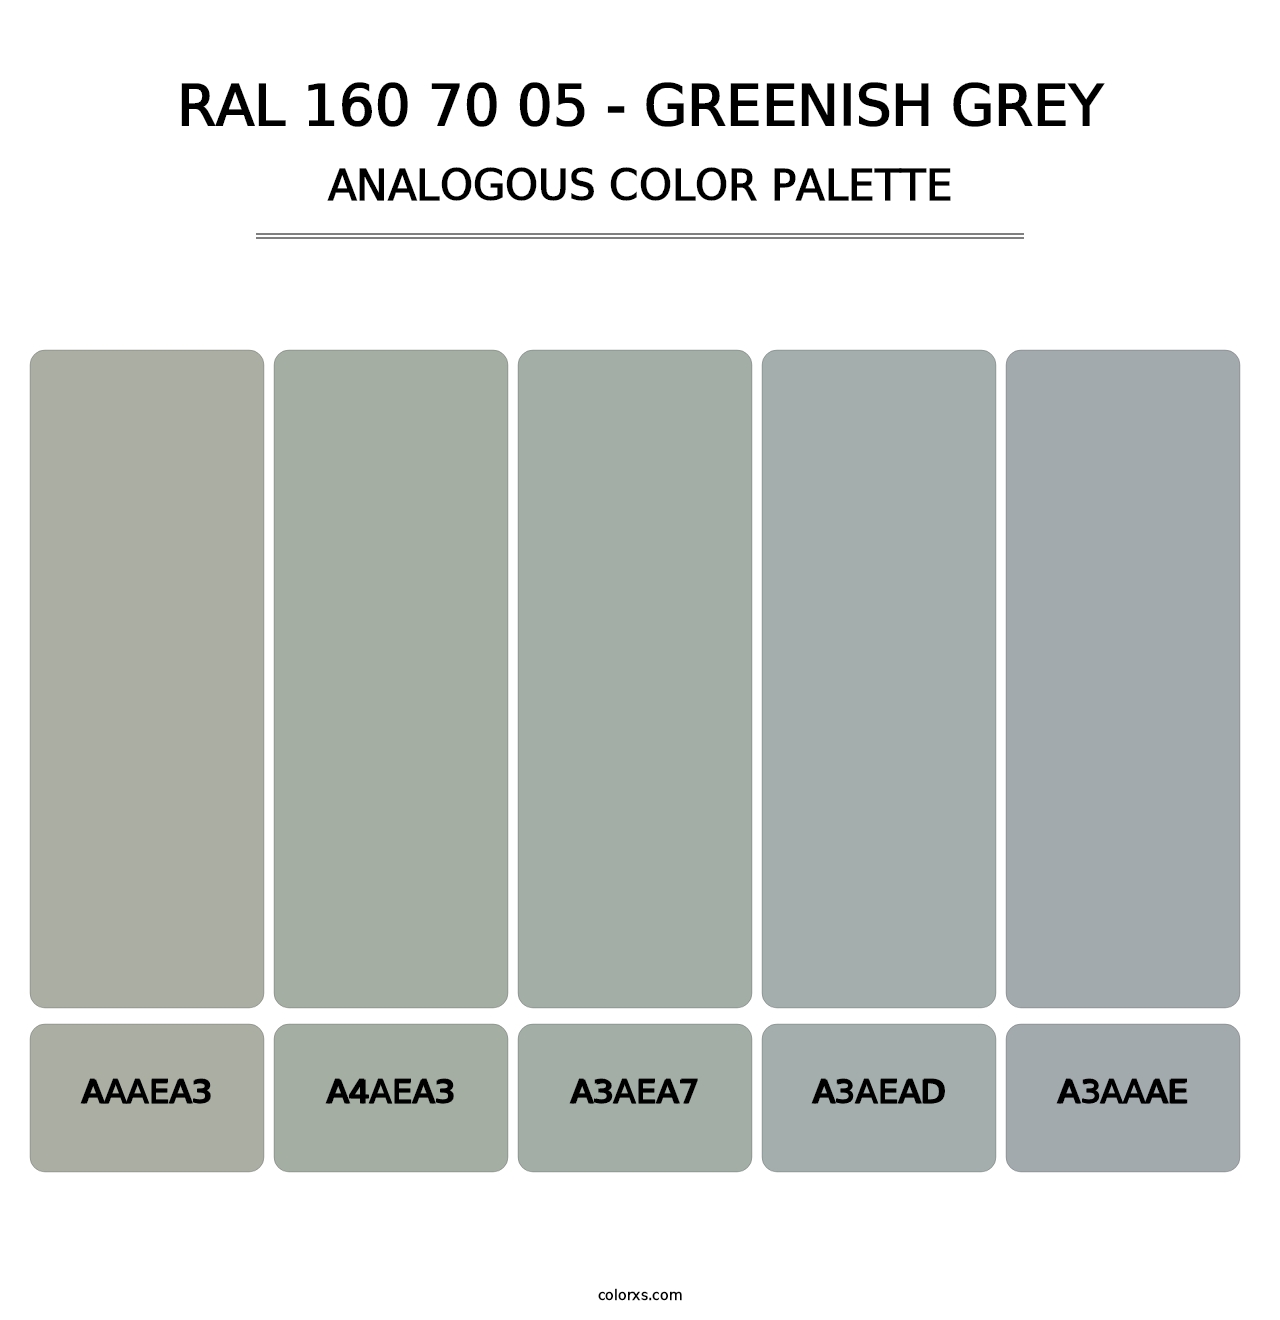 RAL 160 70 05 - Greenish Grey - Analogous Color Palette